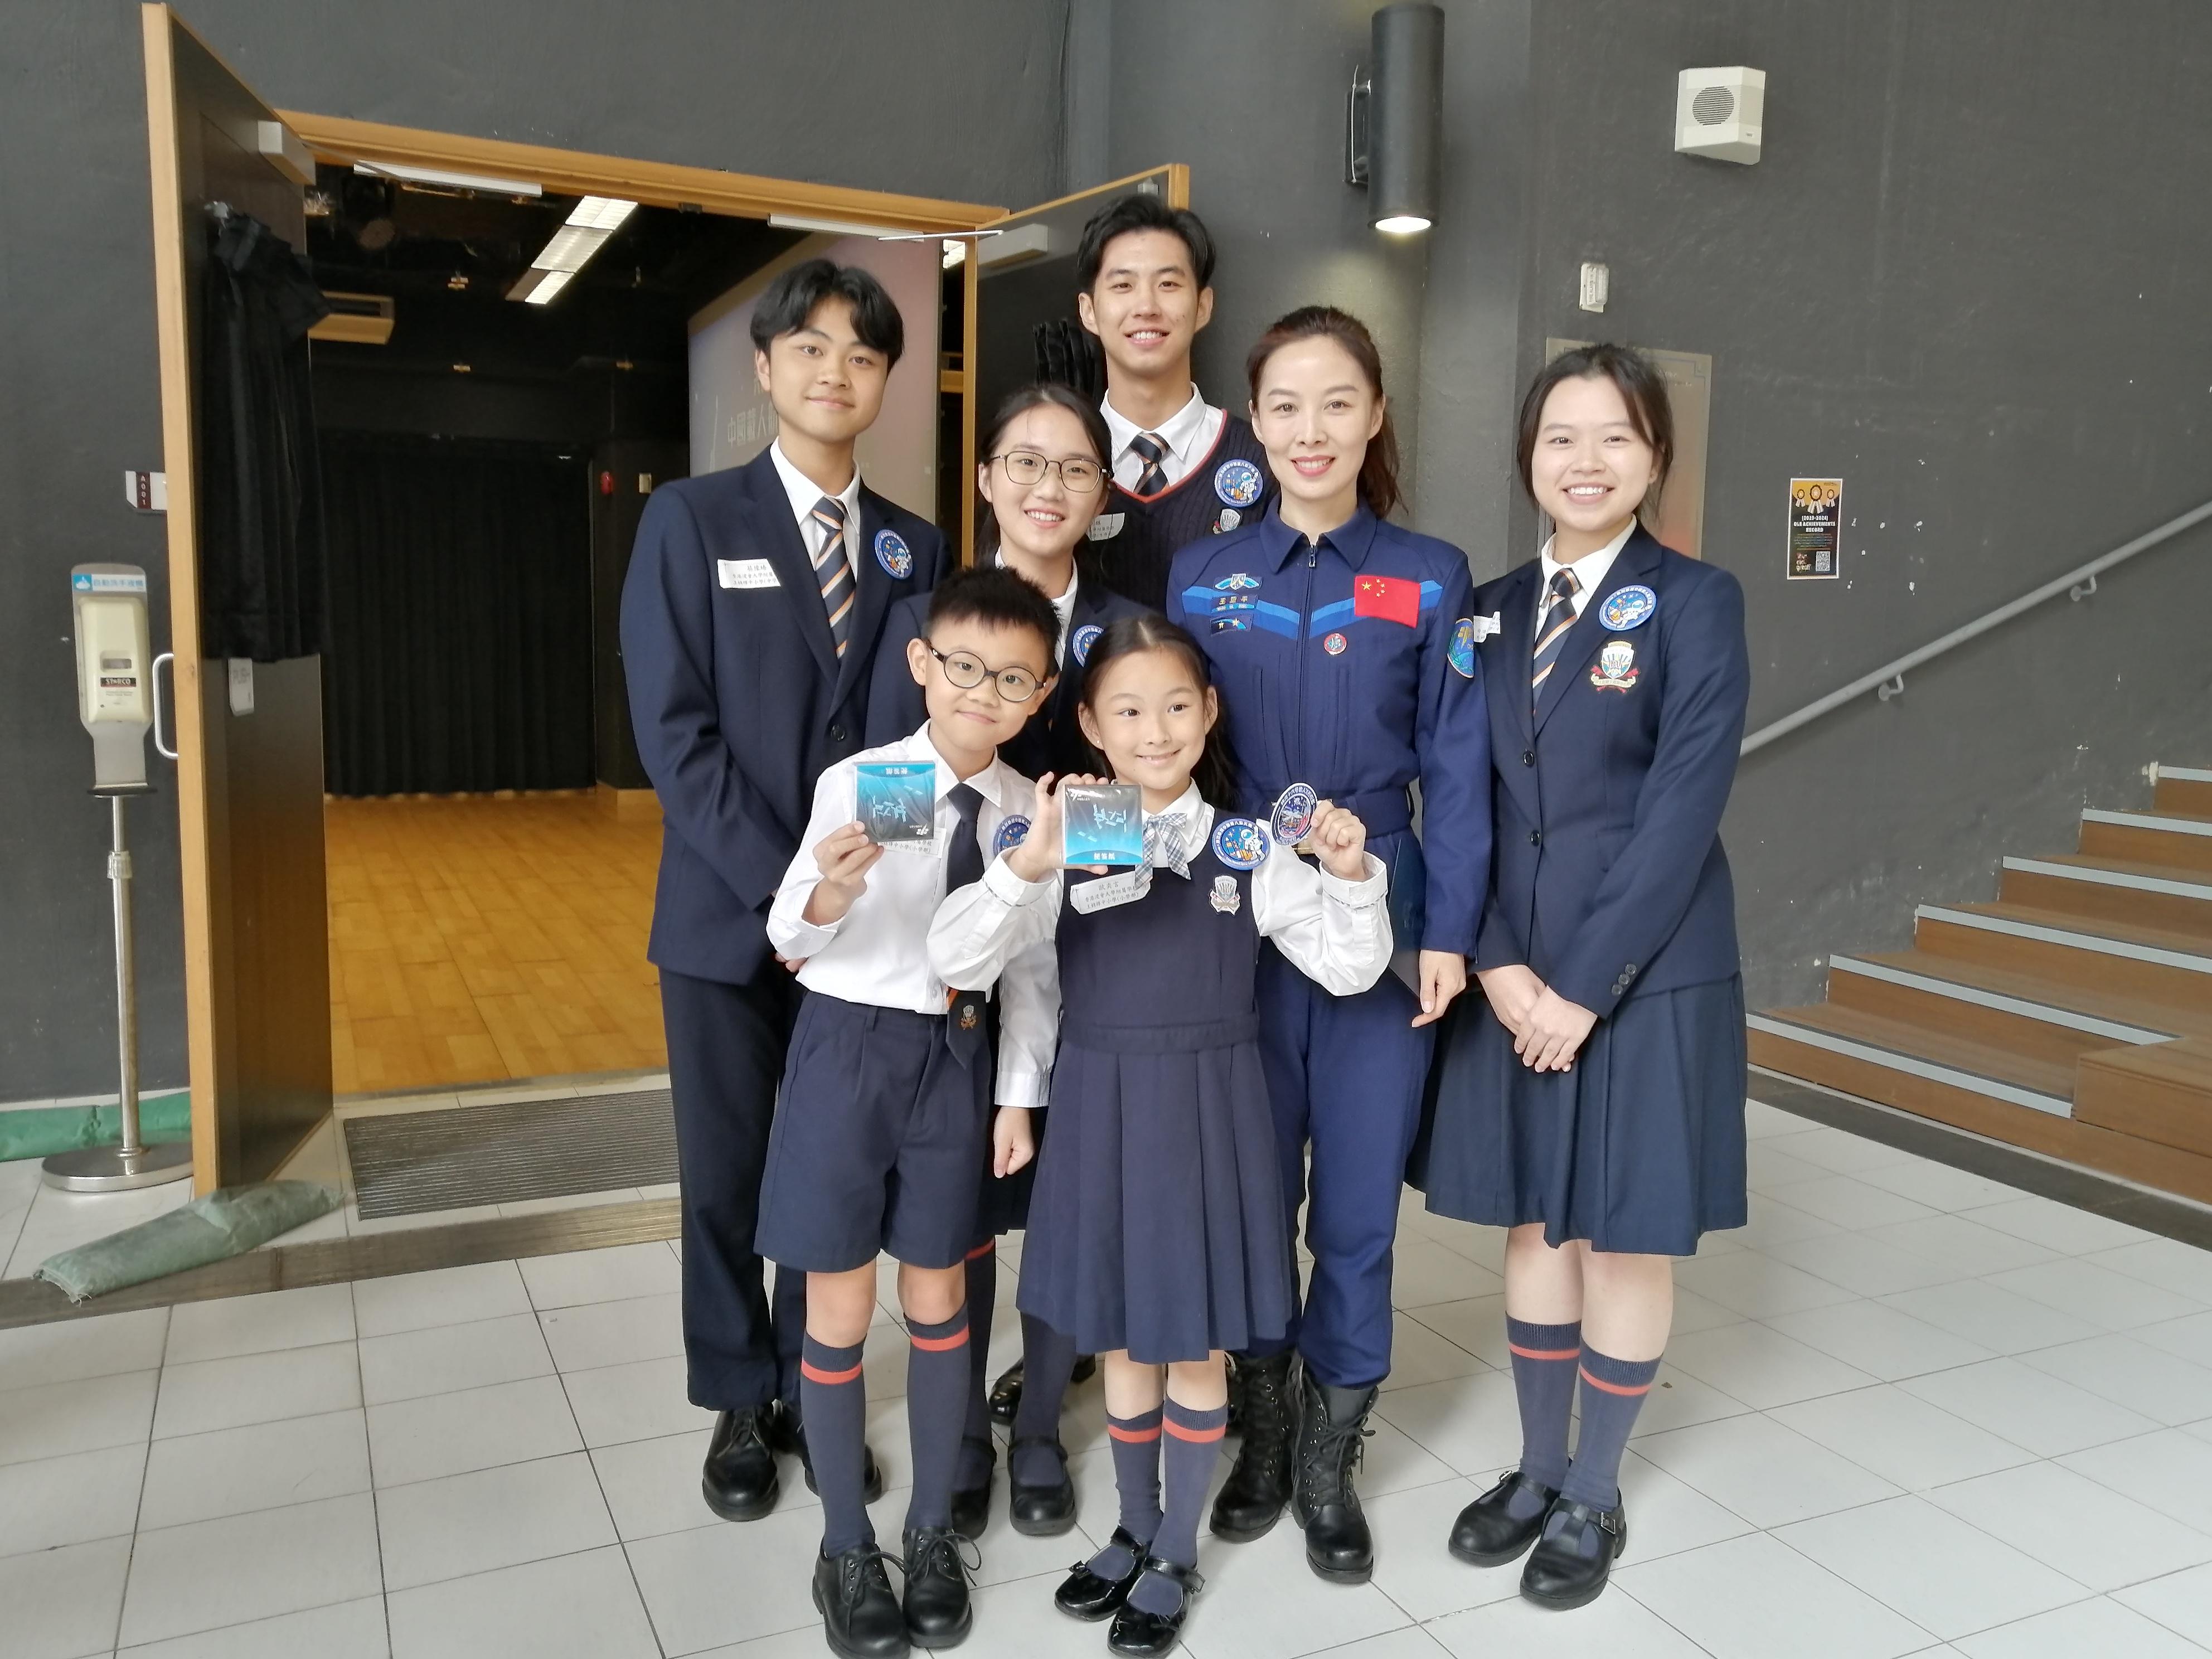 The China Manned Space delegation continued their visit in Hong Kong today (November 29). Photo shows Shenzhou-13 astronaut Ms Wang Yaping (second row, second right) attending a dialogue session with students at Hong Kong Baptist University Affiliated School Wong Kam Fai Secondary and Primary School (Primary Division).





